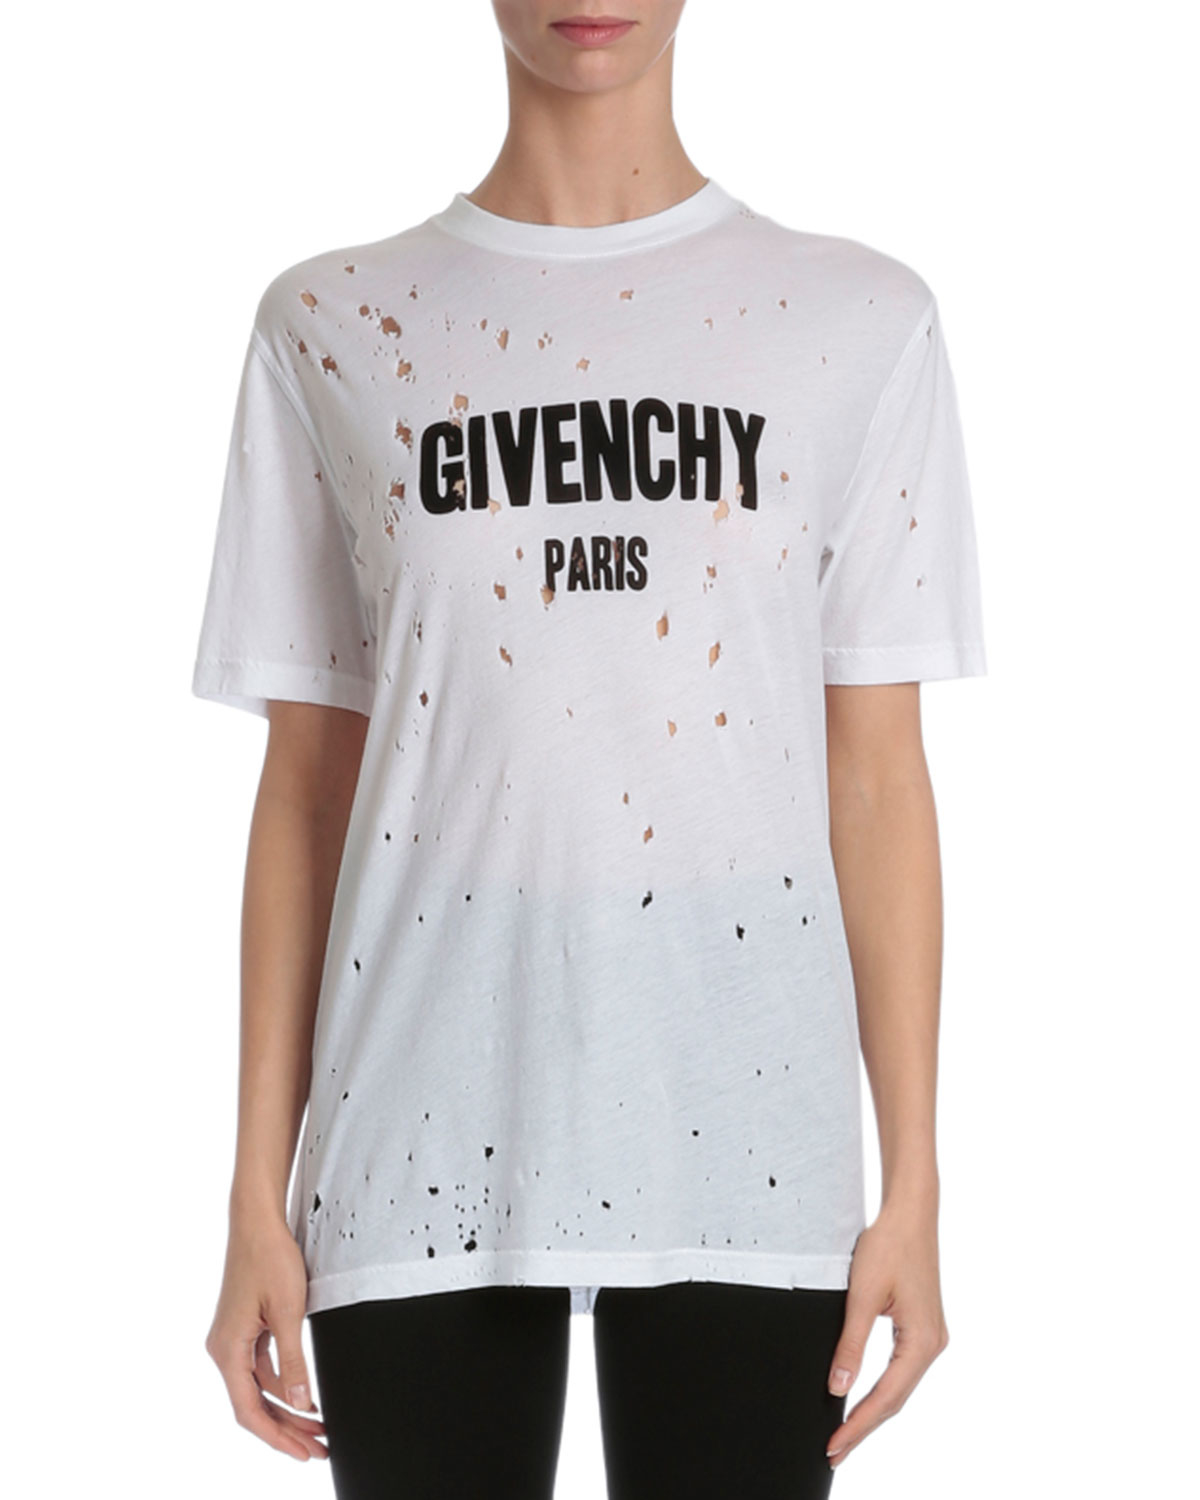 Givenchy Cotton Distressed Logo T-shirt in White